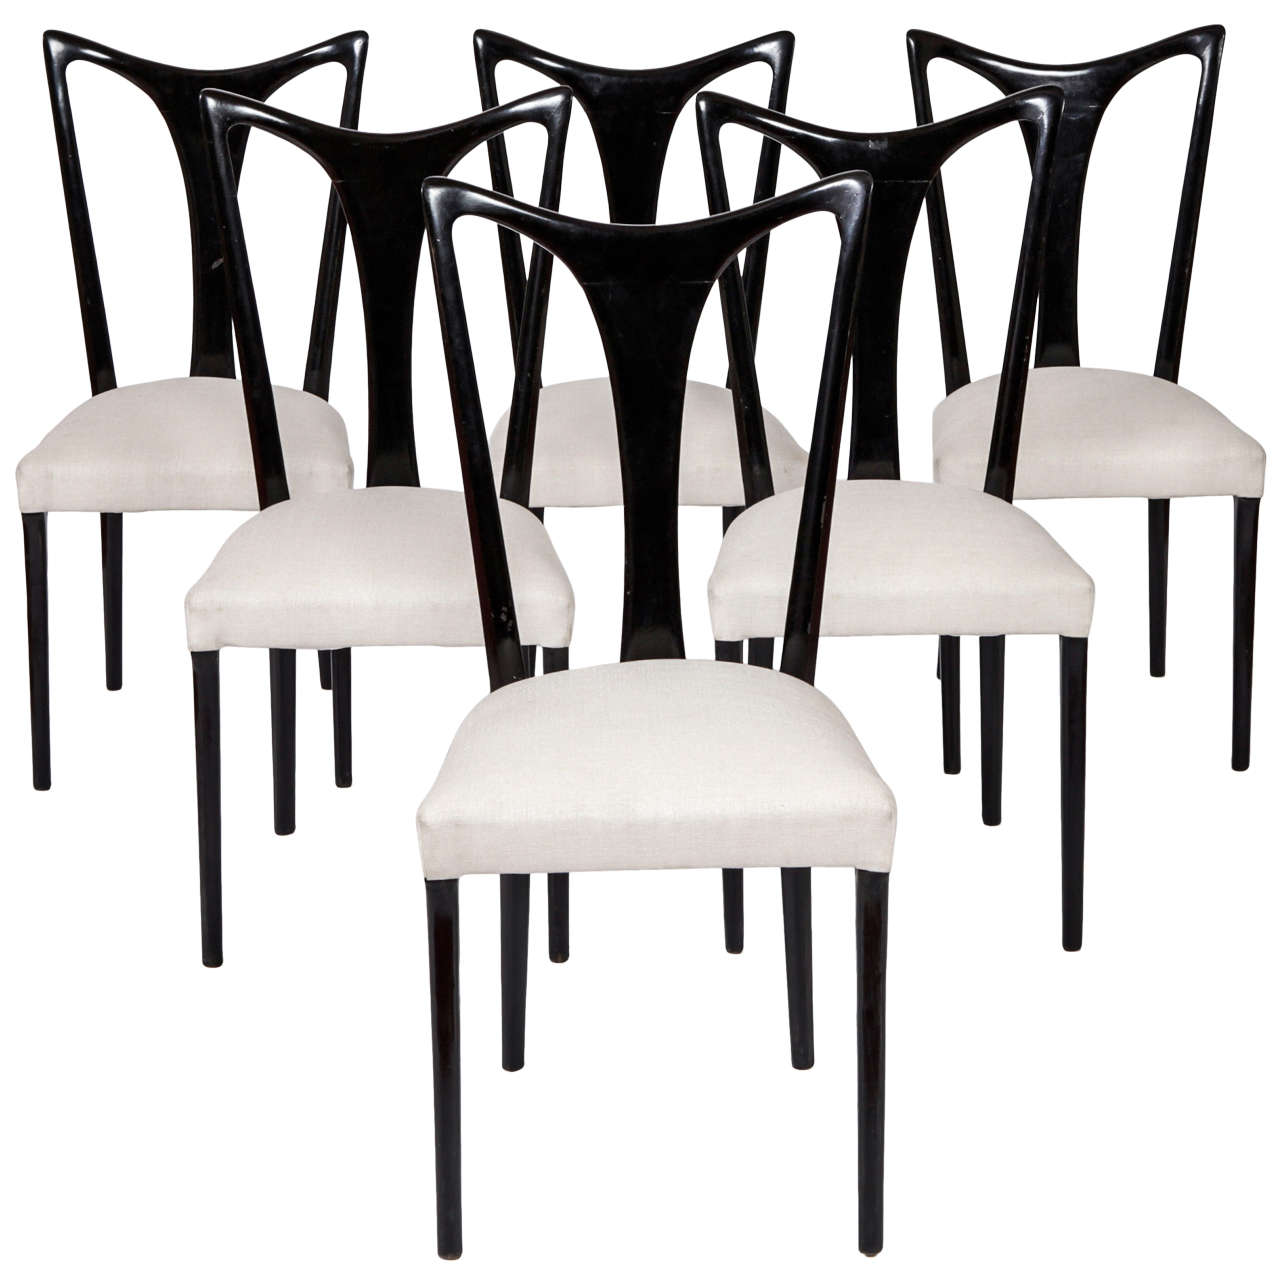 Guglielmo Ulrich Rare Set Of 6 Dining Chairs